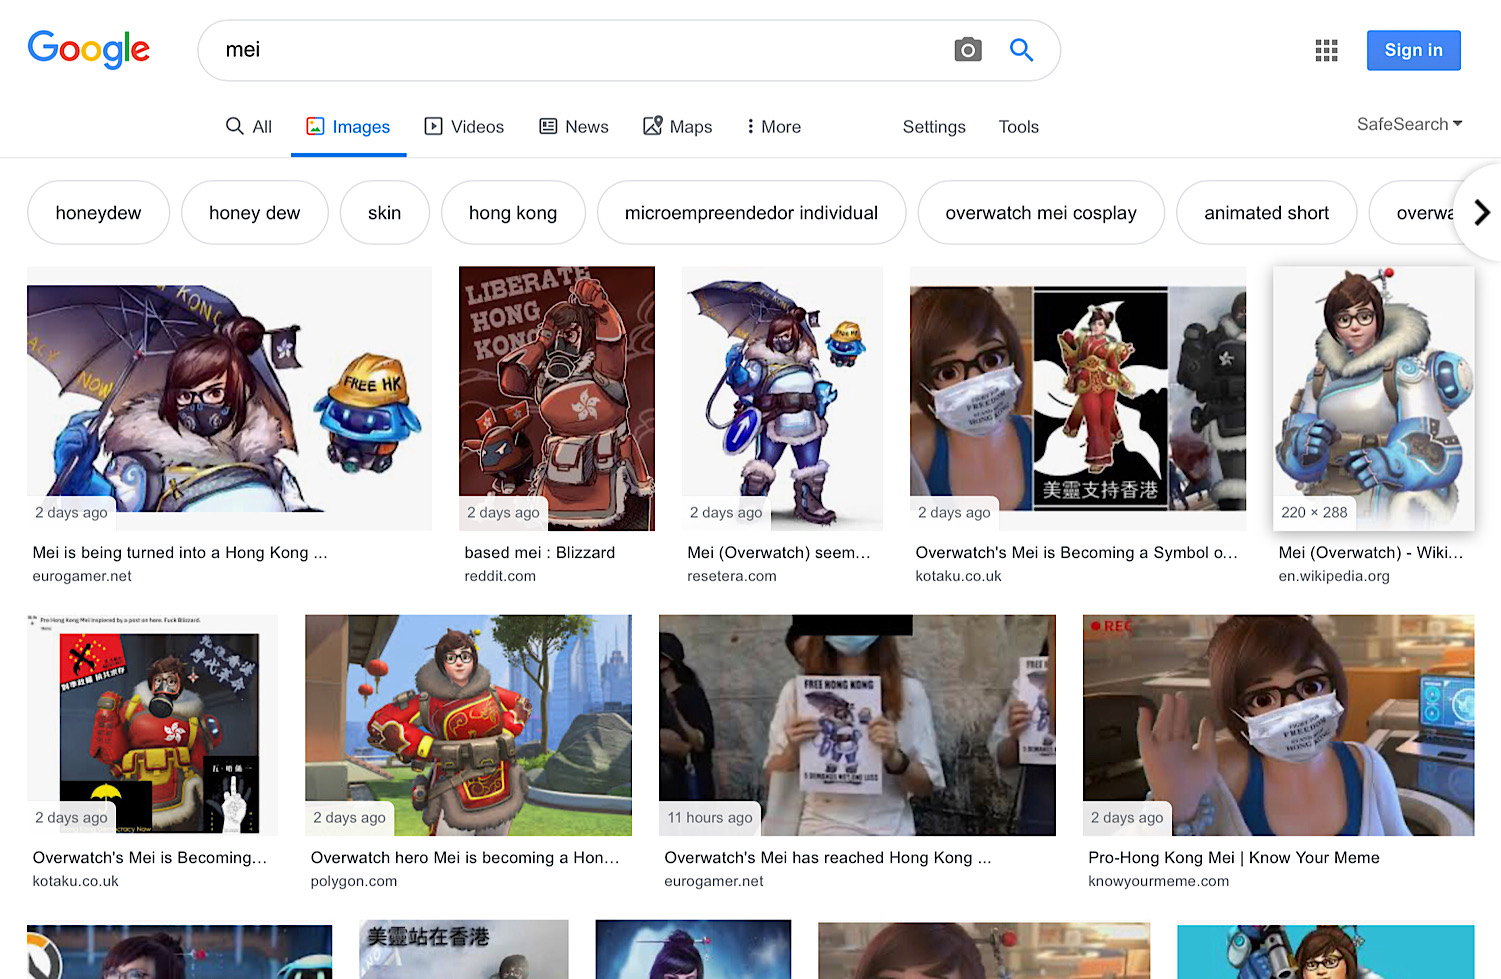 Search results for Mei on Google Images.